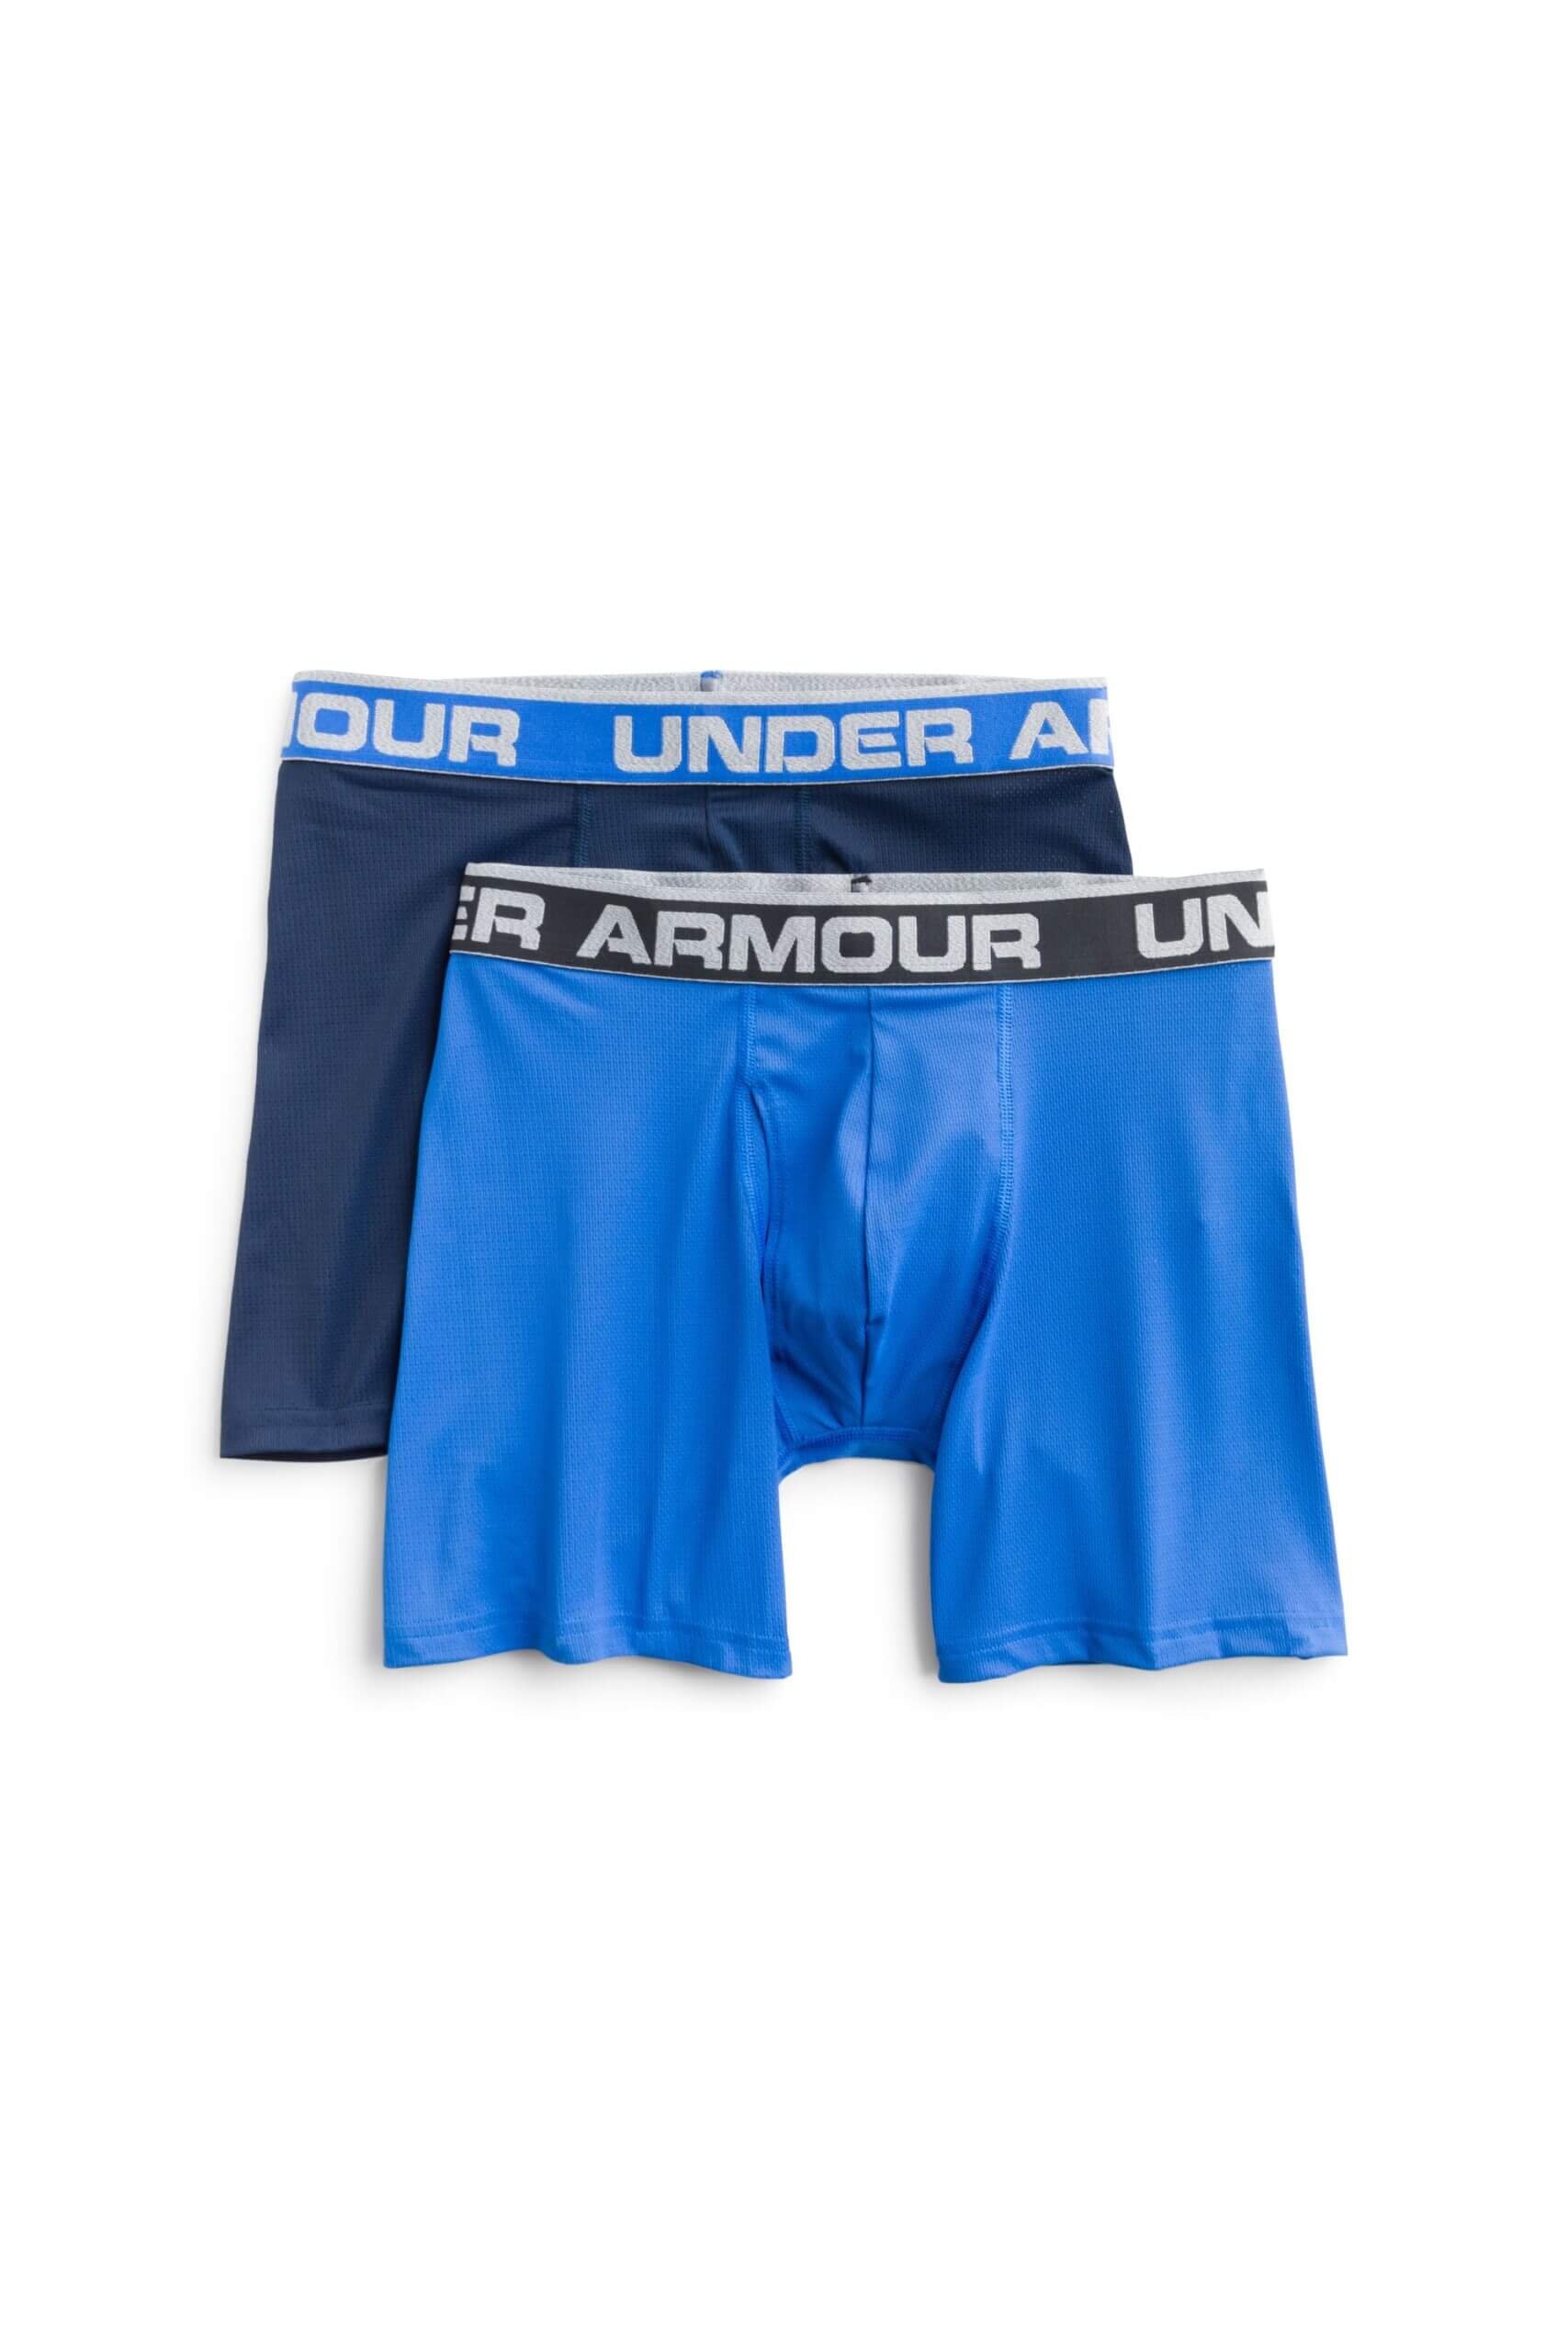 Moisture Wicking Underwear  How It Works & Why Your Teen Needs It